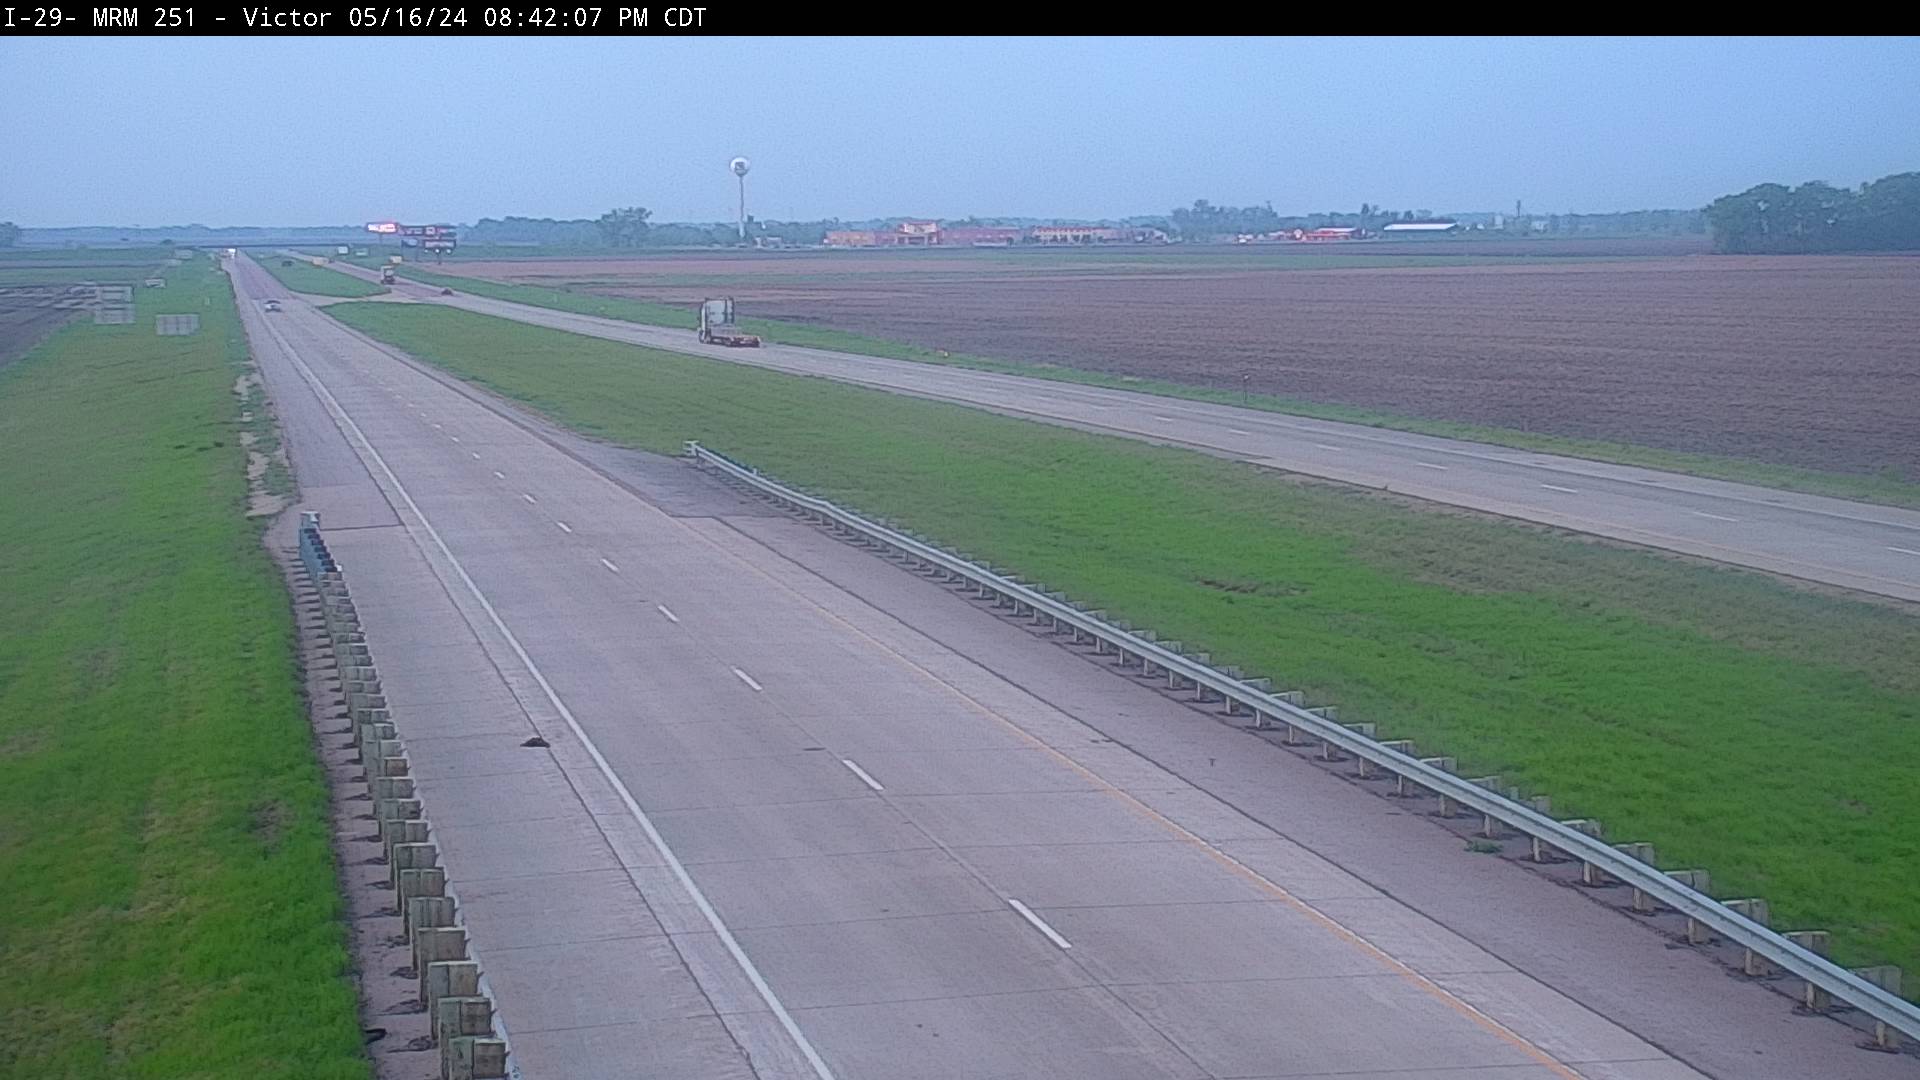 Traffic Cam North of town along I-29 @ MP 251.5 - North Player